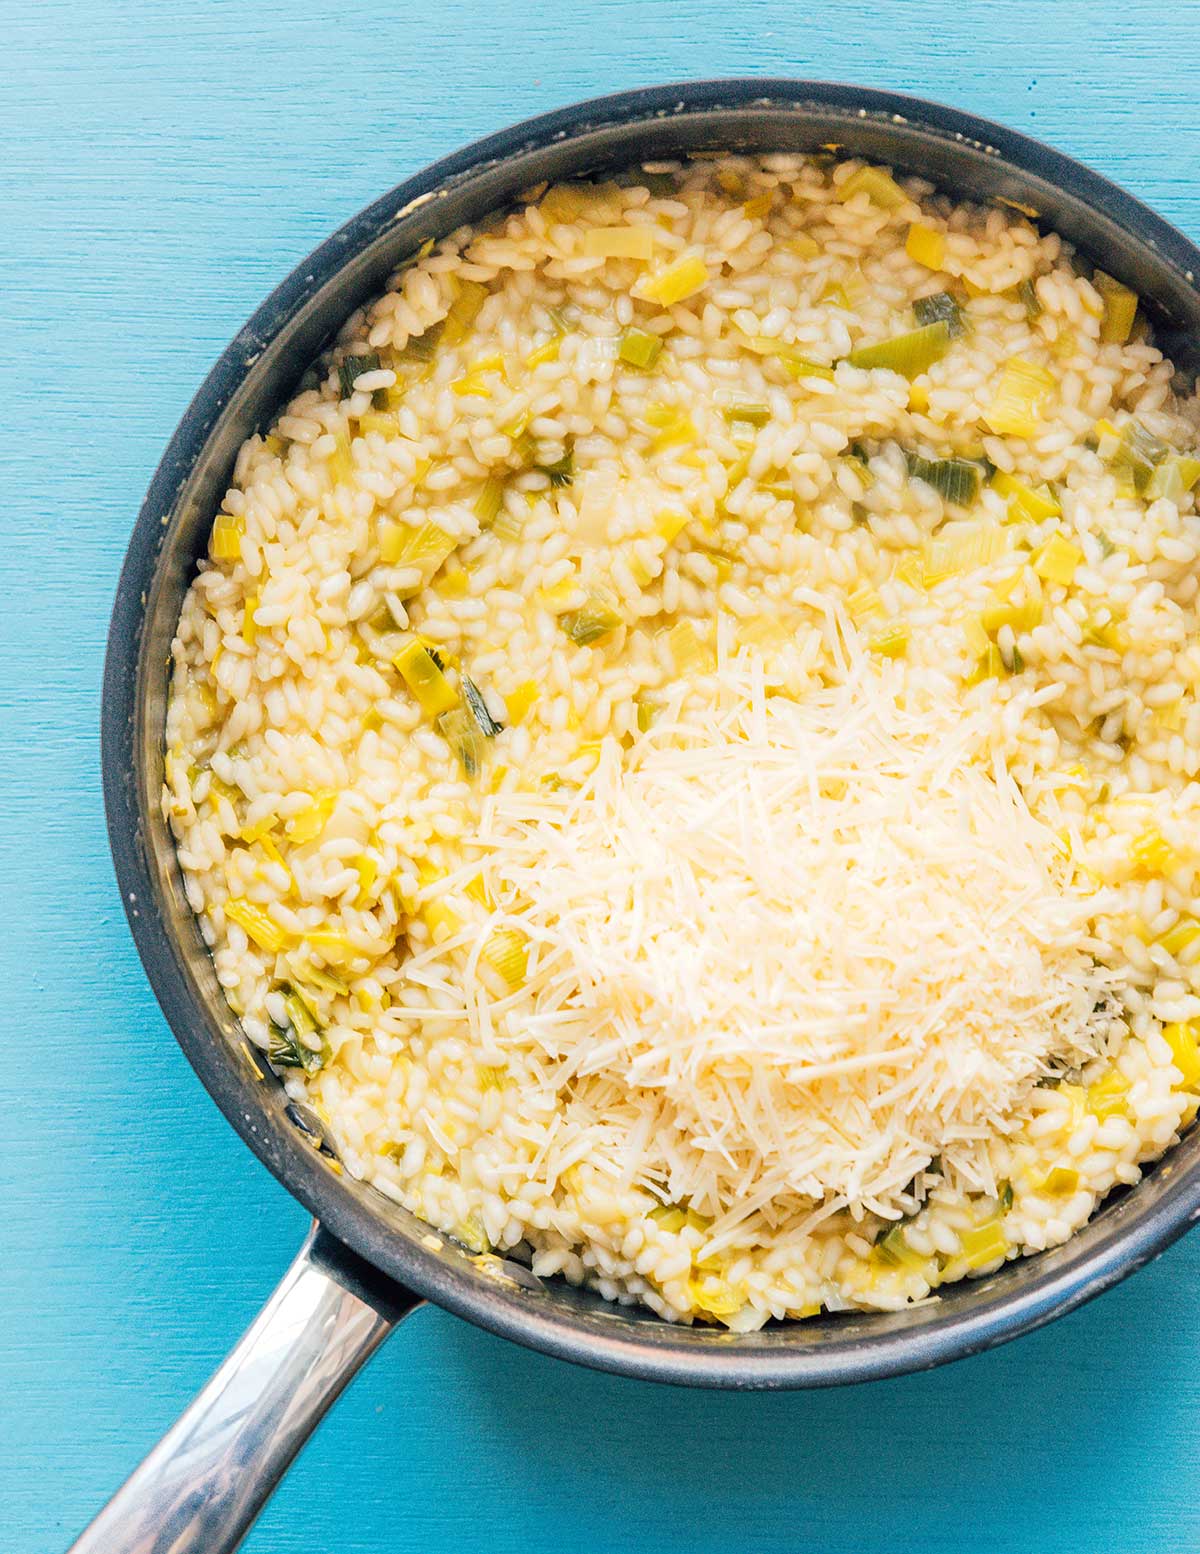 A skillet filled with leek risotto and shredded parmesan cheese